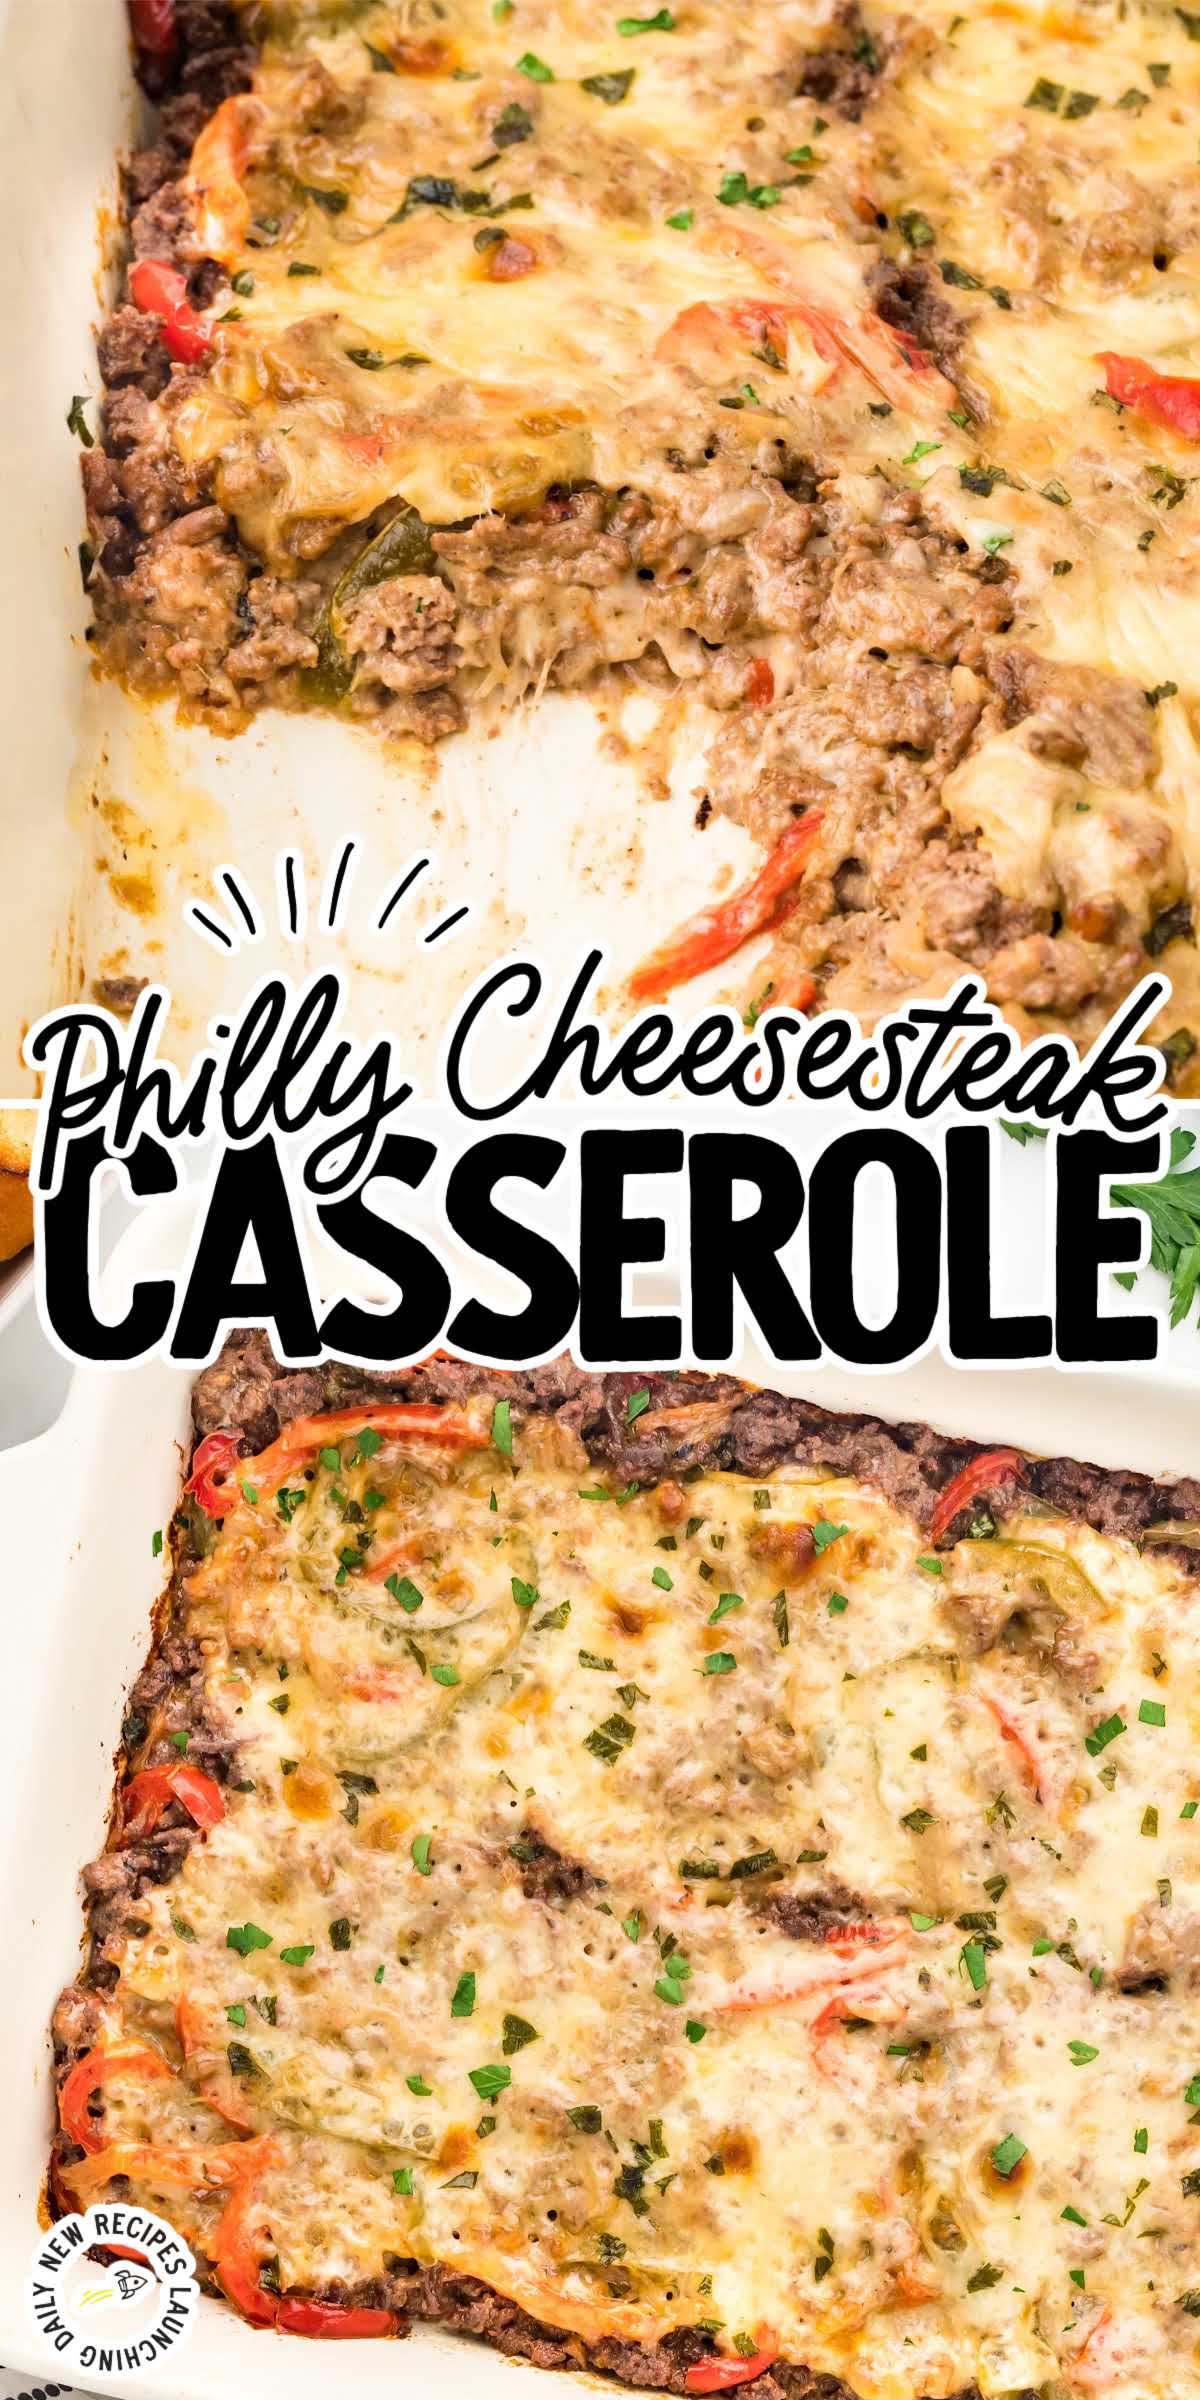 Philly Cheesesteak Casserole - Spaceships and Laser Beams